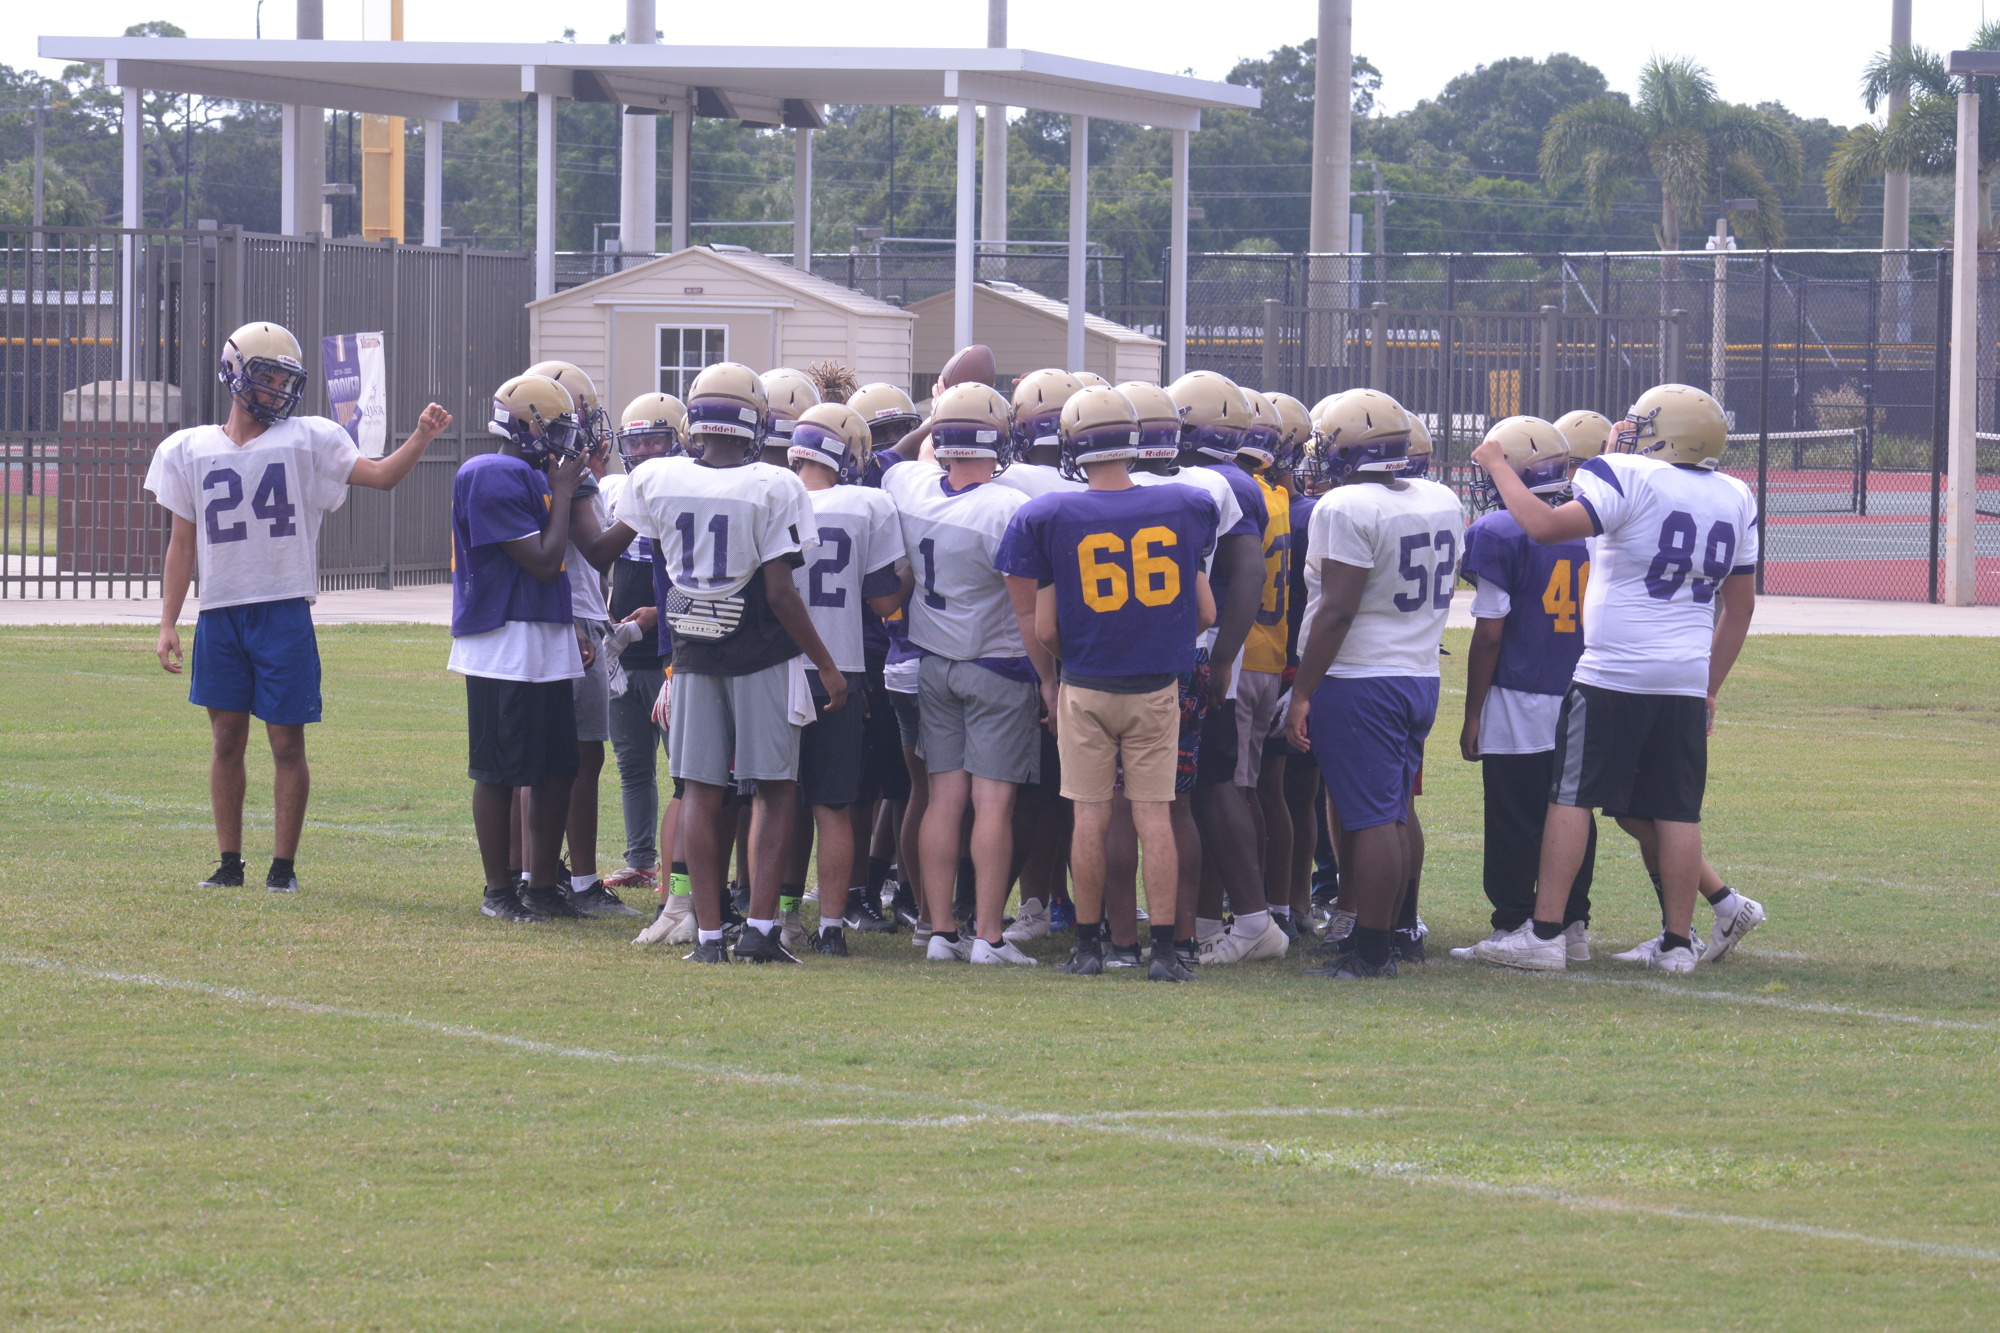 The Booker High football team had just 30-35 players consistently attend summer workouts, Baraka Atkins said, but they'll play in 2021 with the hopes of adding more players as they go.